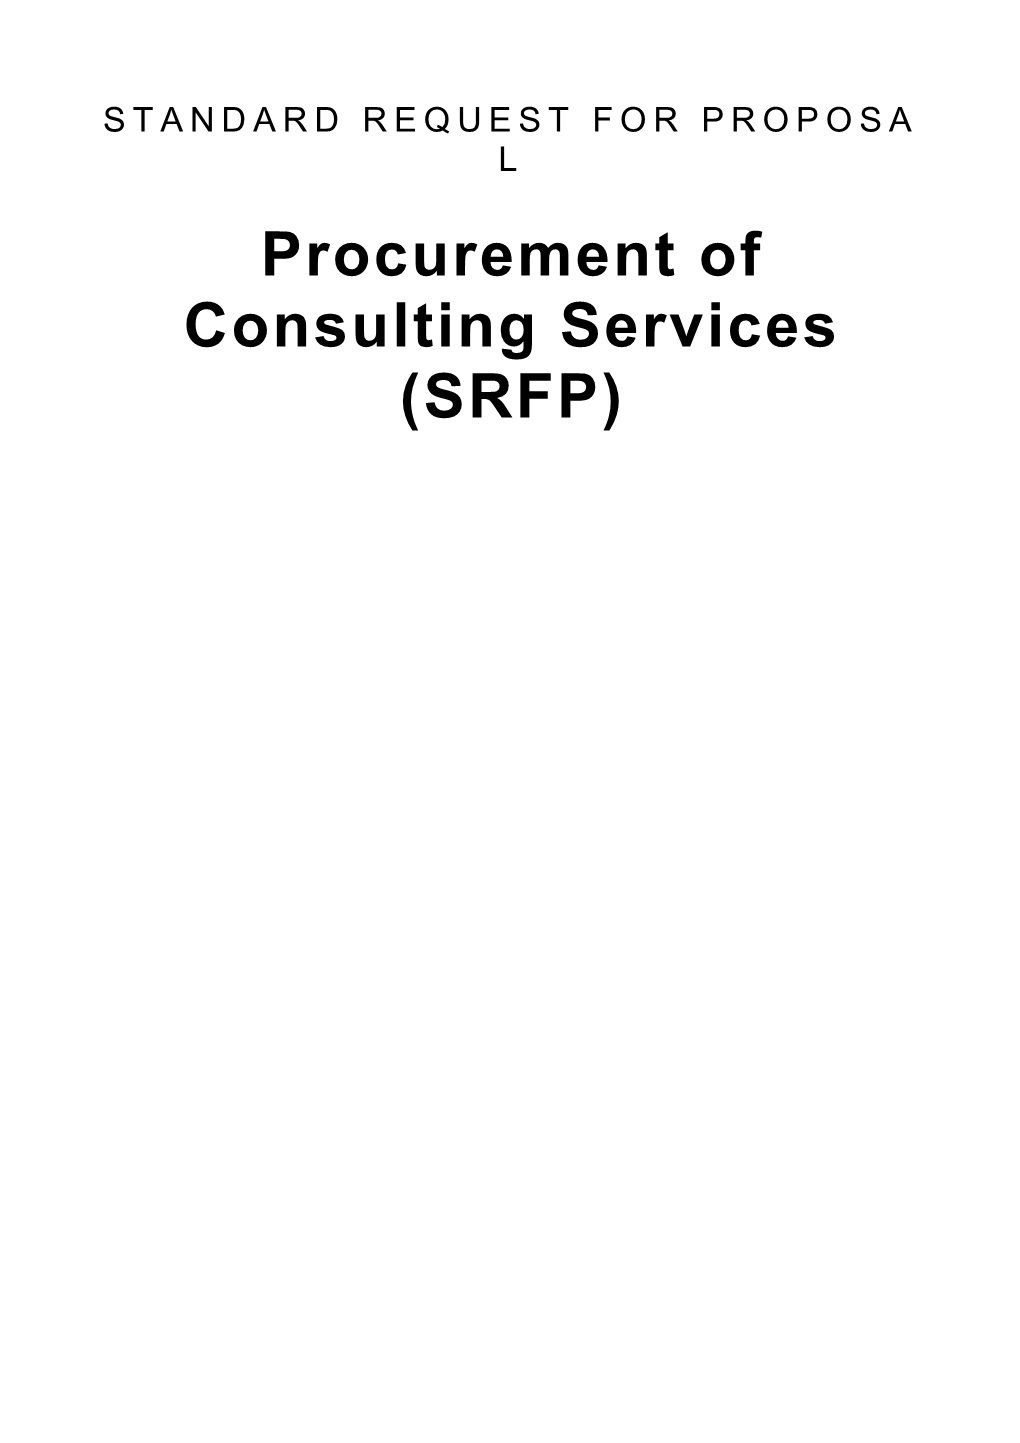 Procurement of Consulting Services (SRFP) s1